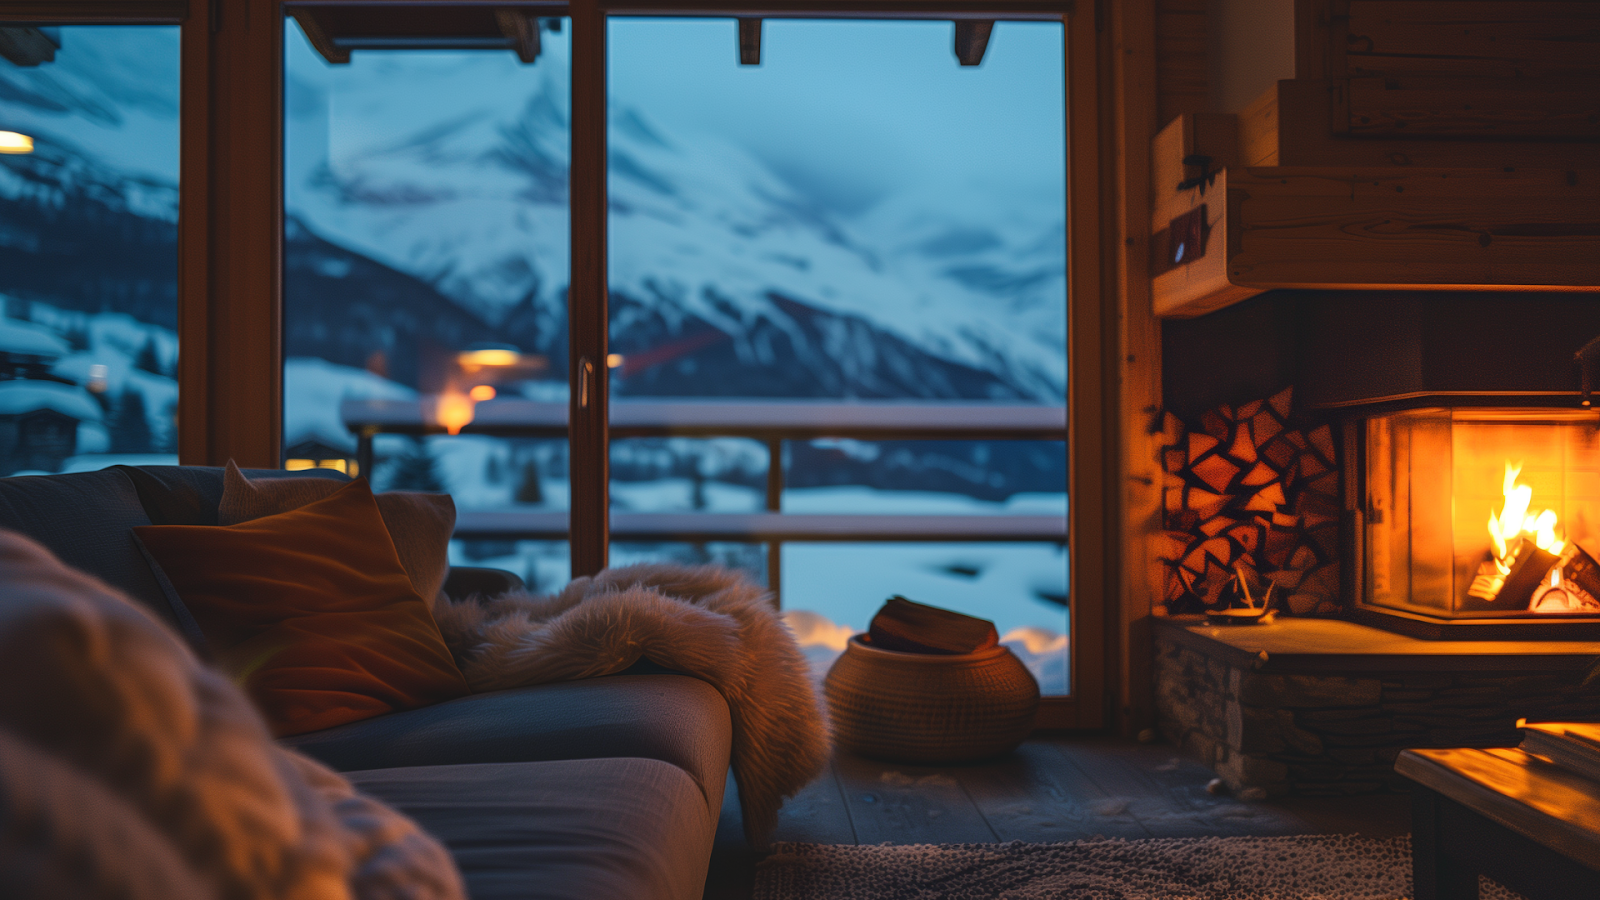 Cozy evening in a luxurious Swiss Alps cabin, with a fireplace and a stunning snow-covered mountain view, embodying warmth and comfort.